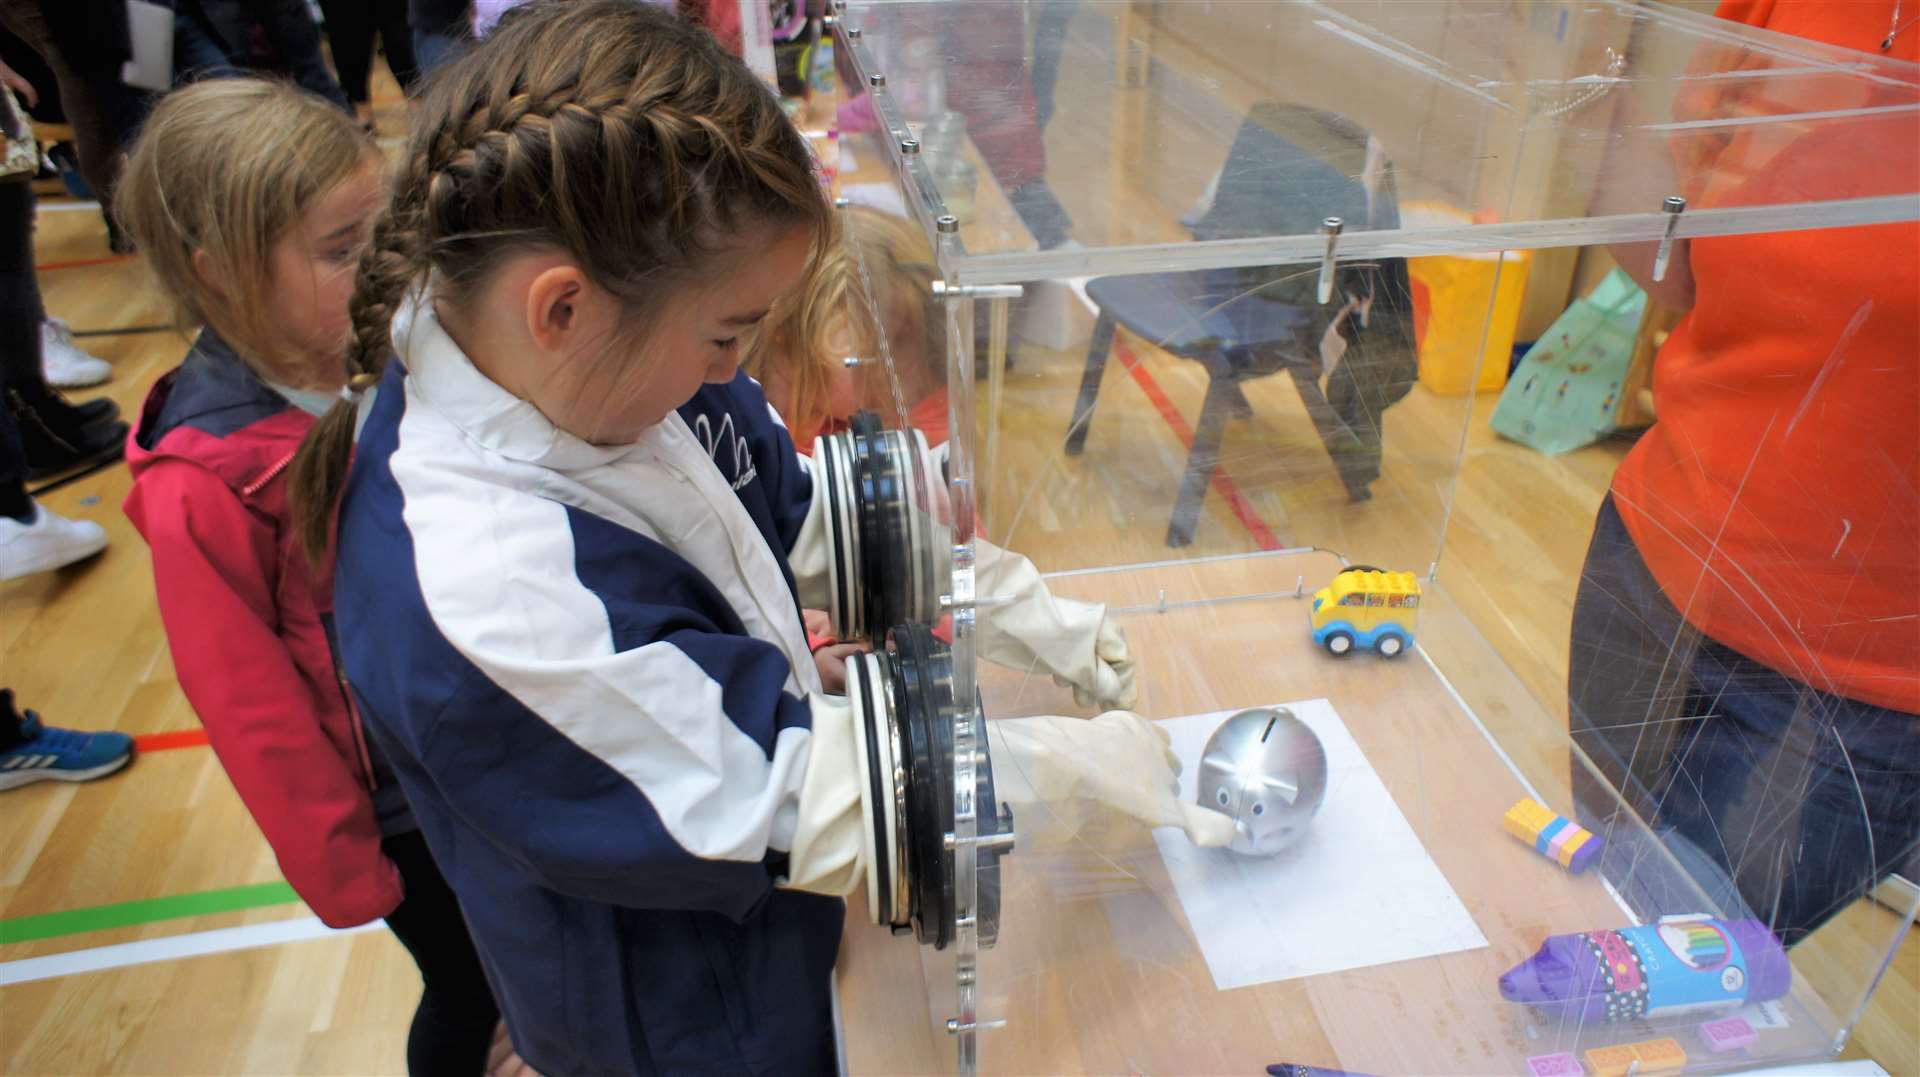 Children learned about the skills utilised at the Dounreay nuclear site. Picture: DGS